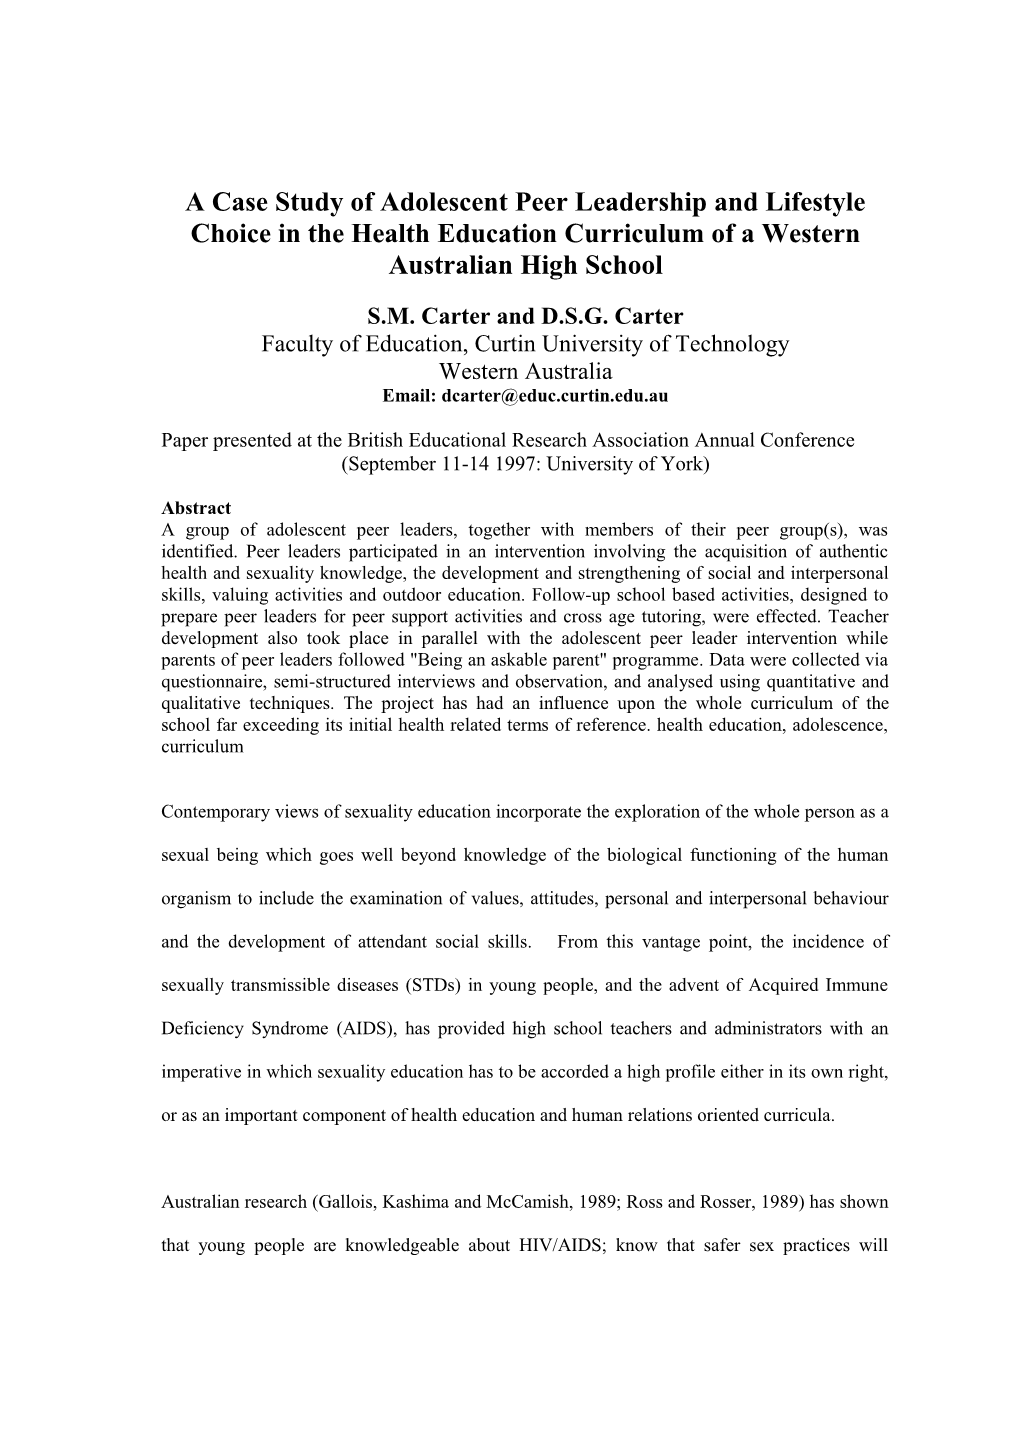 A Case Study of Adolescent Peer Leadership and Lifestyle Choice in the Health Education